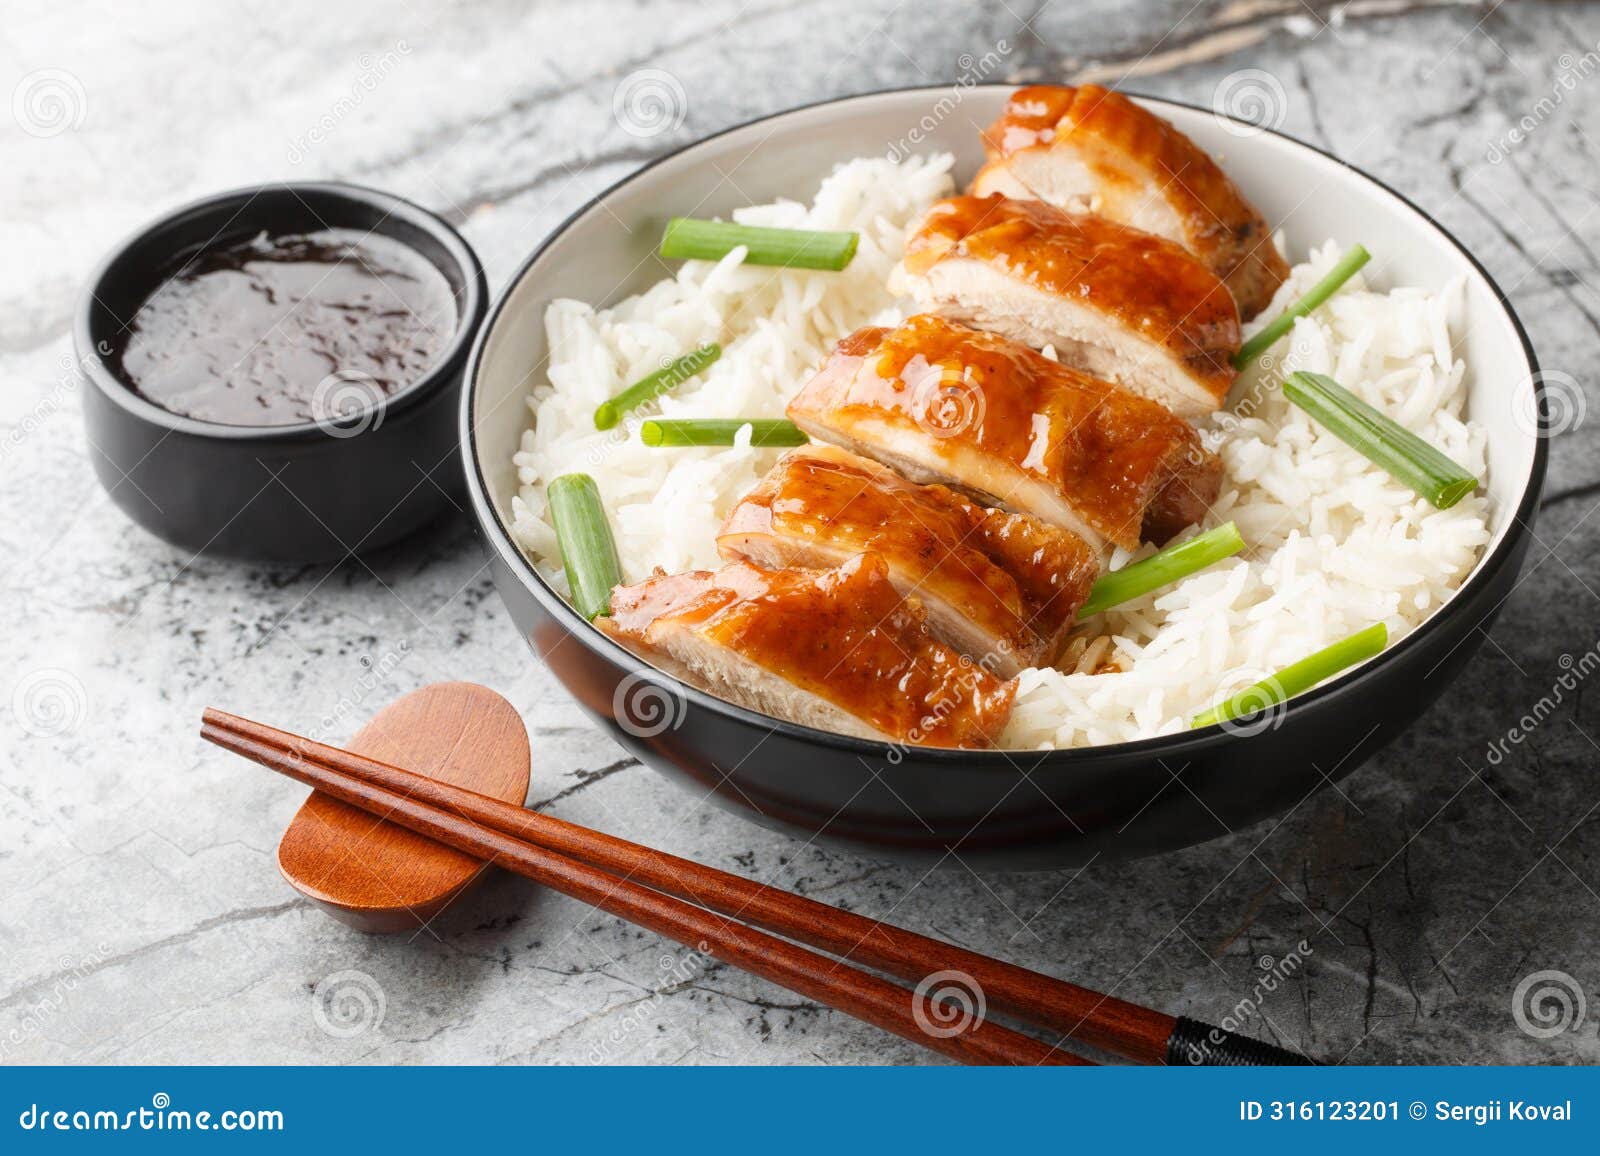 chinese food soy sauce chicken or see yao gai served with rice and dipping sauce closeup. horizontal